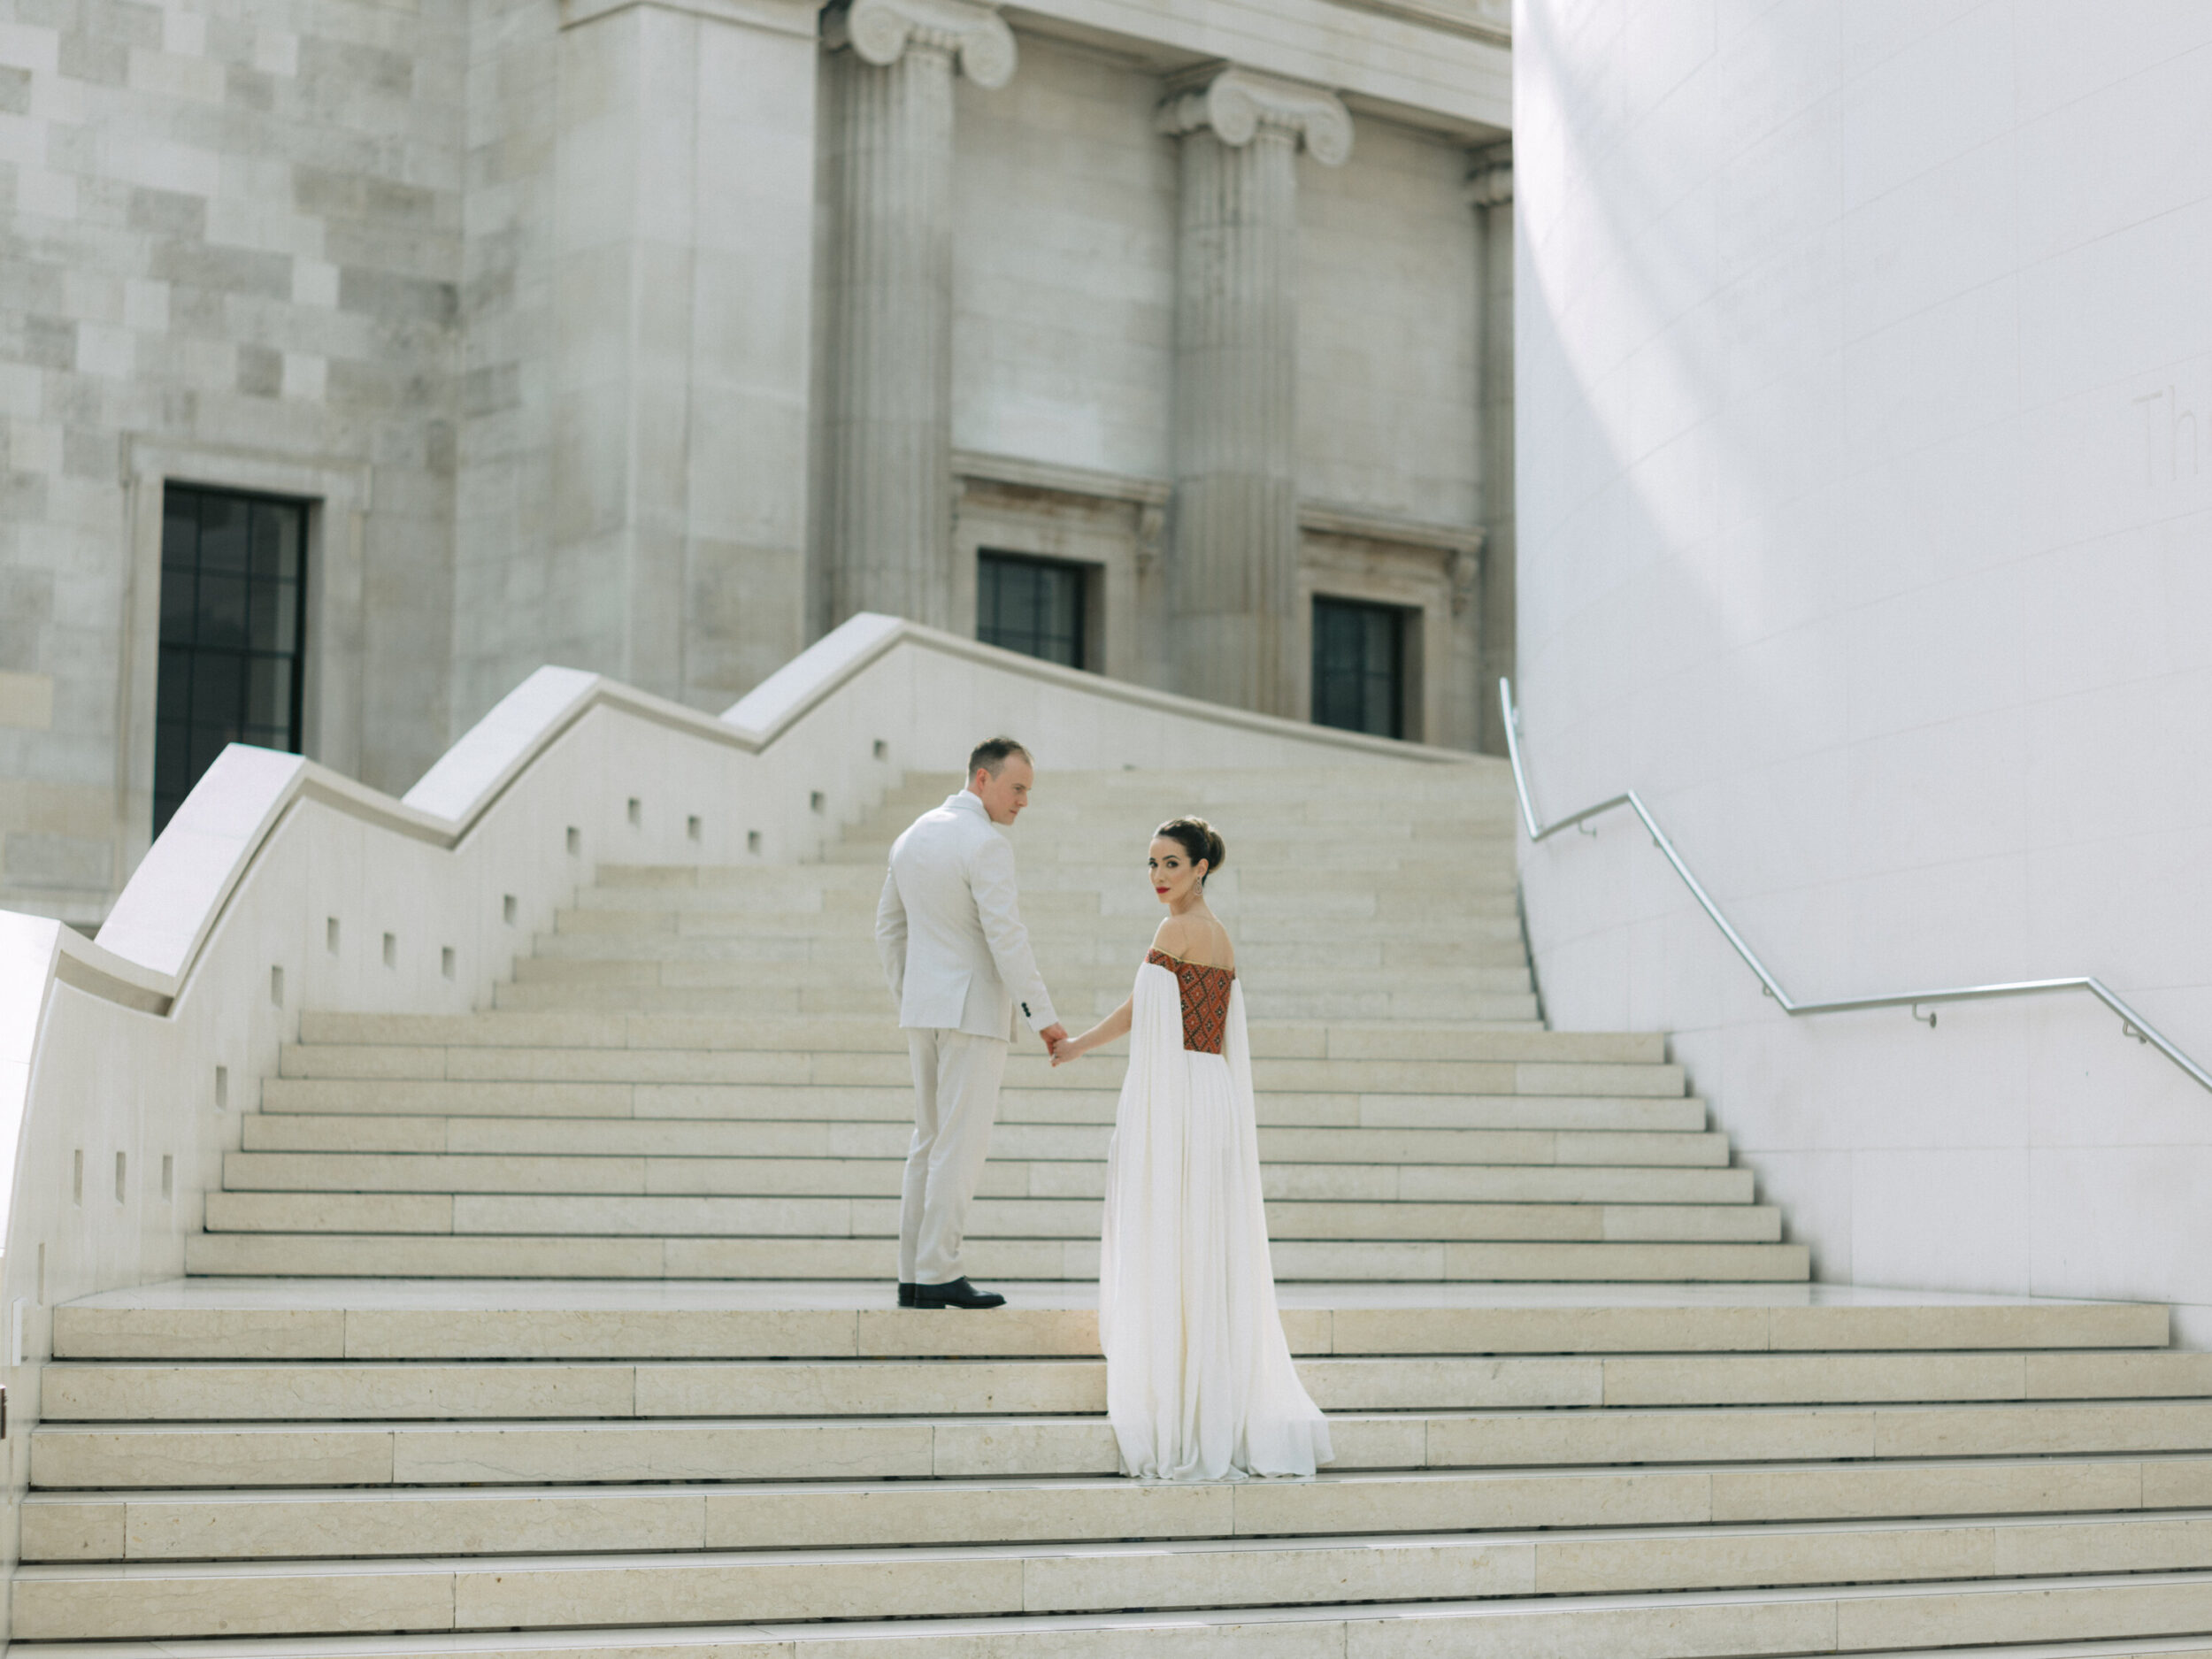 Bride and groom walking up steps at their pre wedding event at the British Museum for this Vogue wedding feature